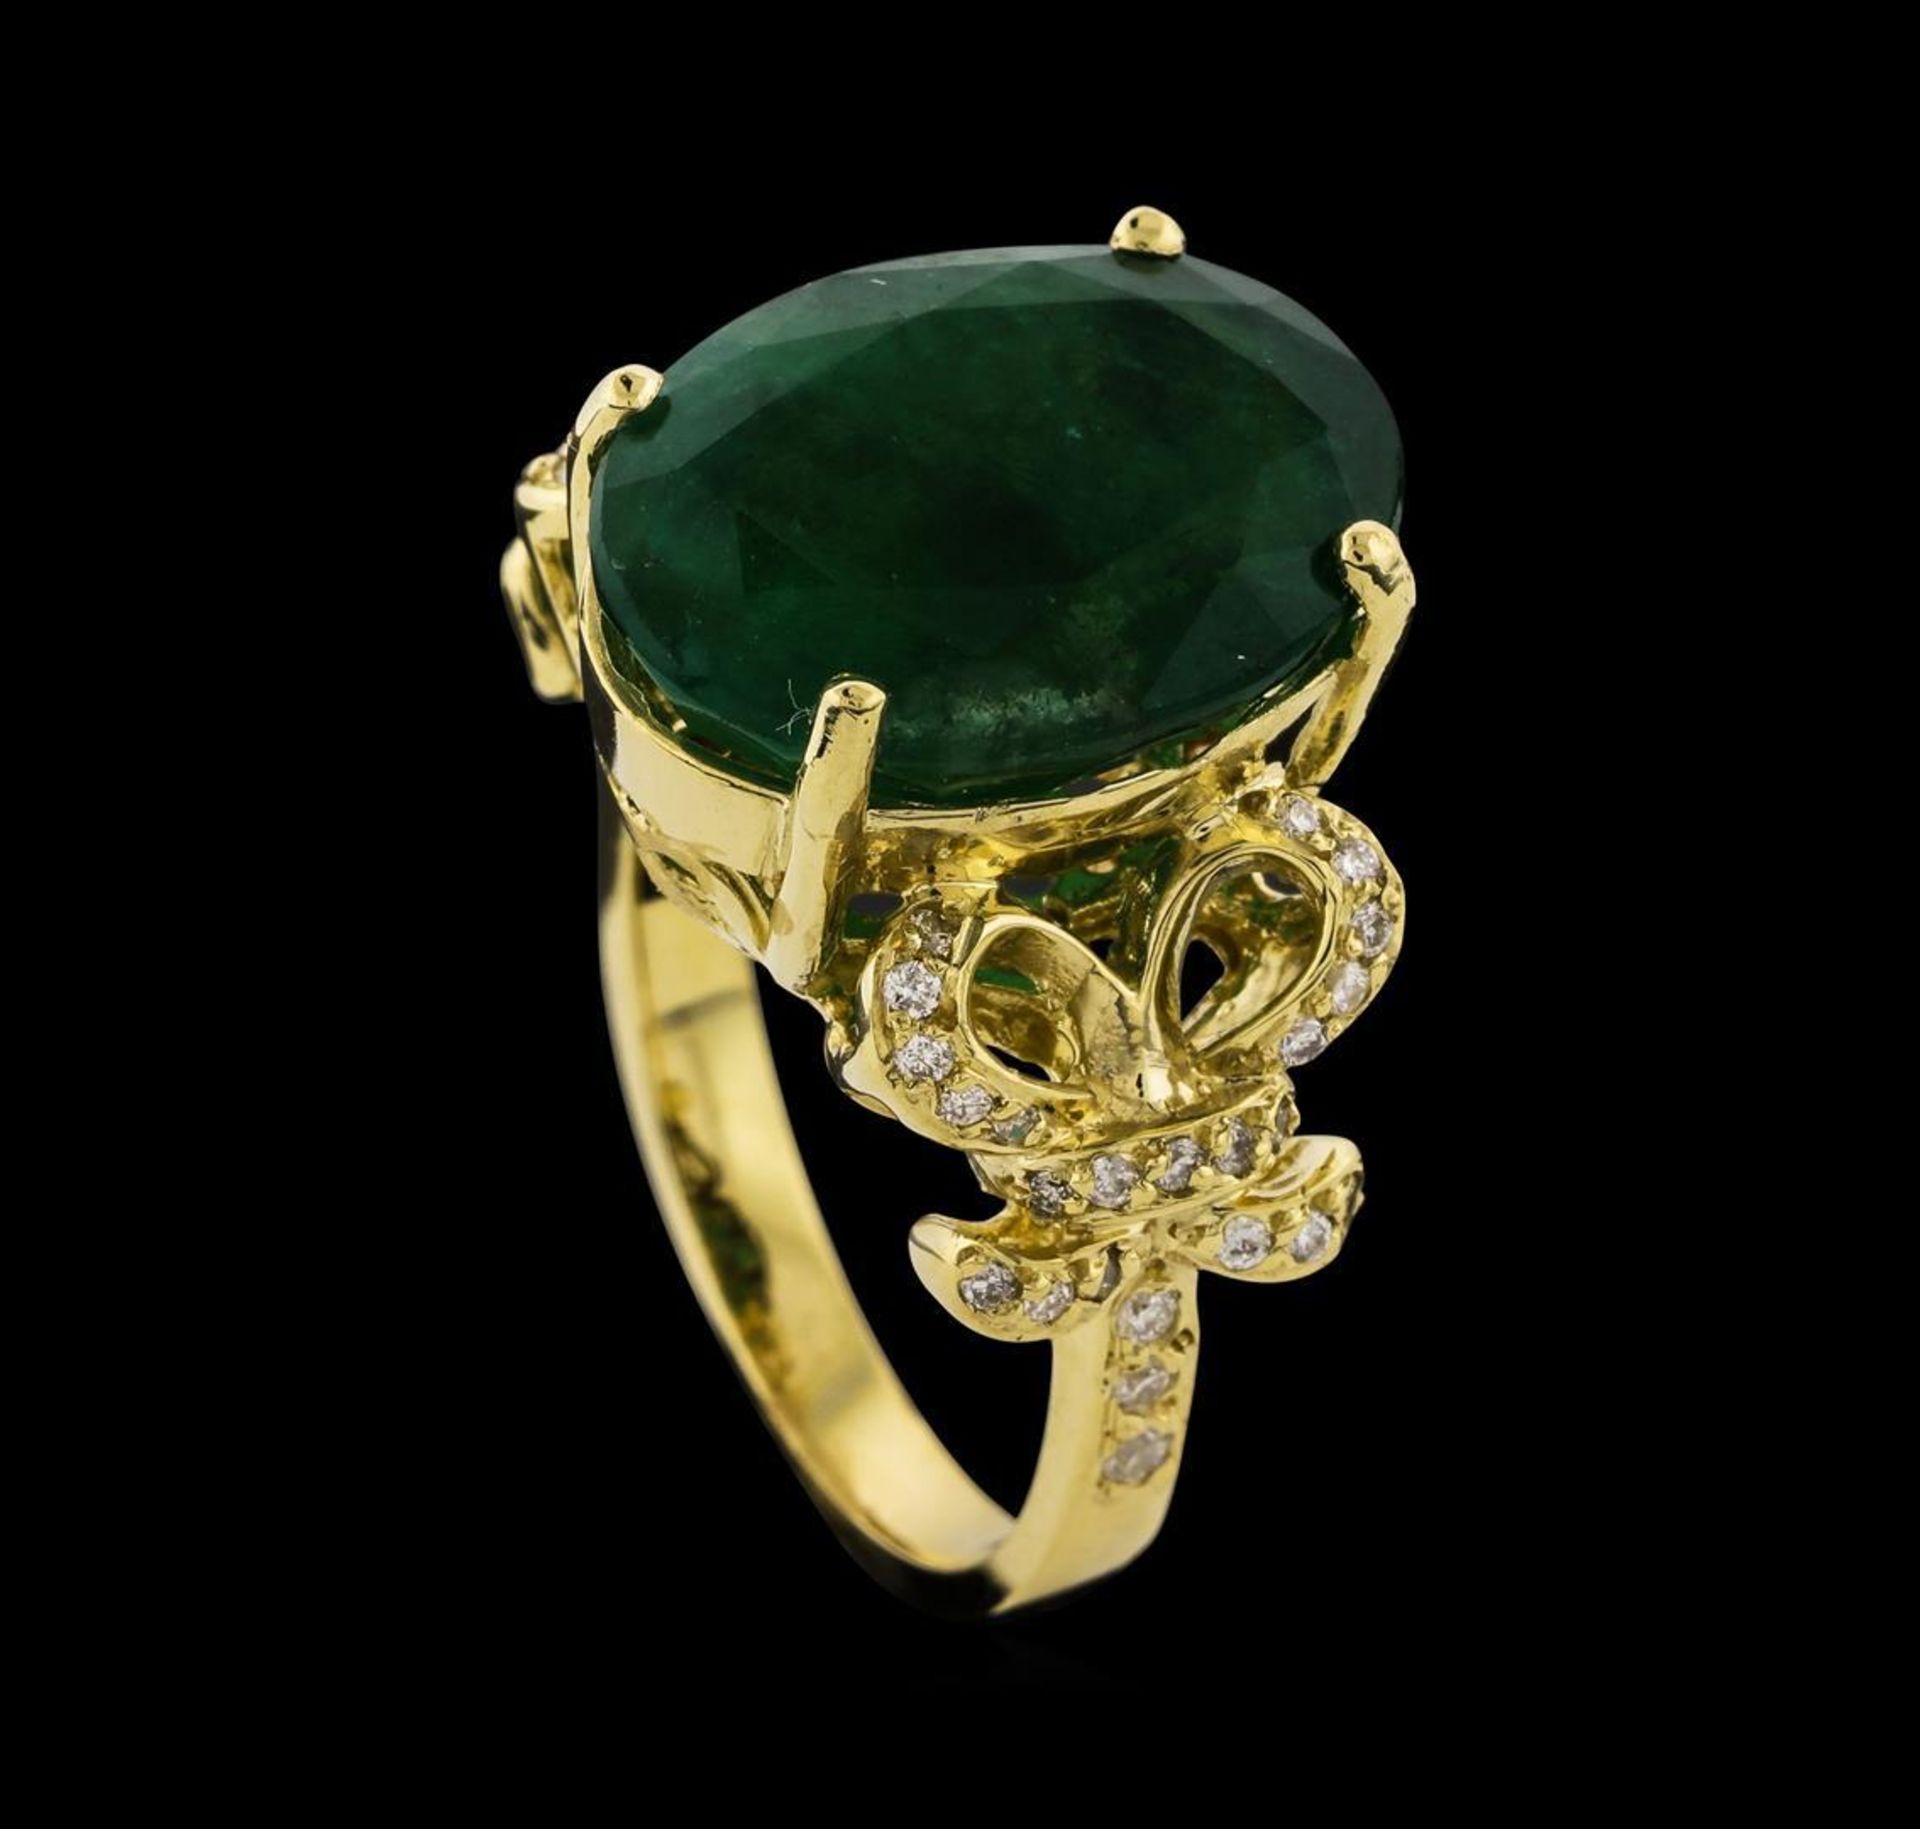 8.71 ctw Emerald and Diamond Ring - 14KT Yellow Gold - Image 4 of 5